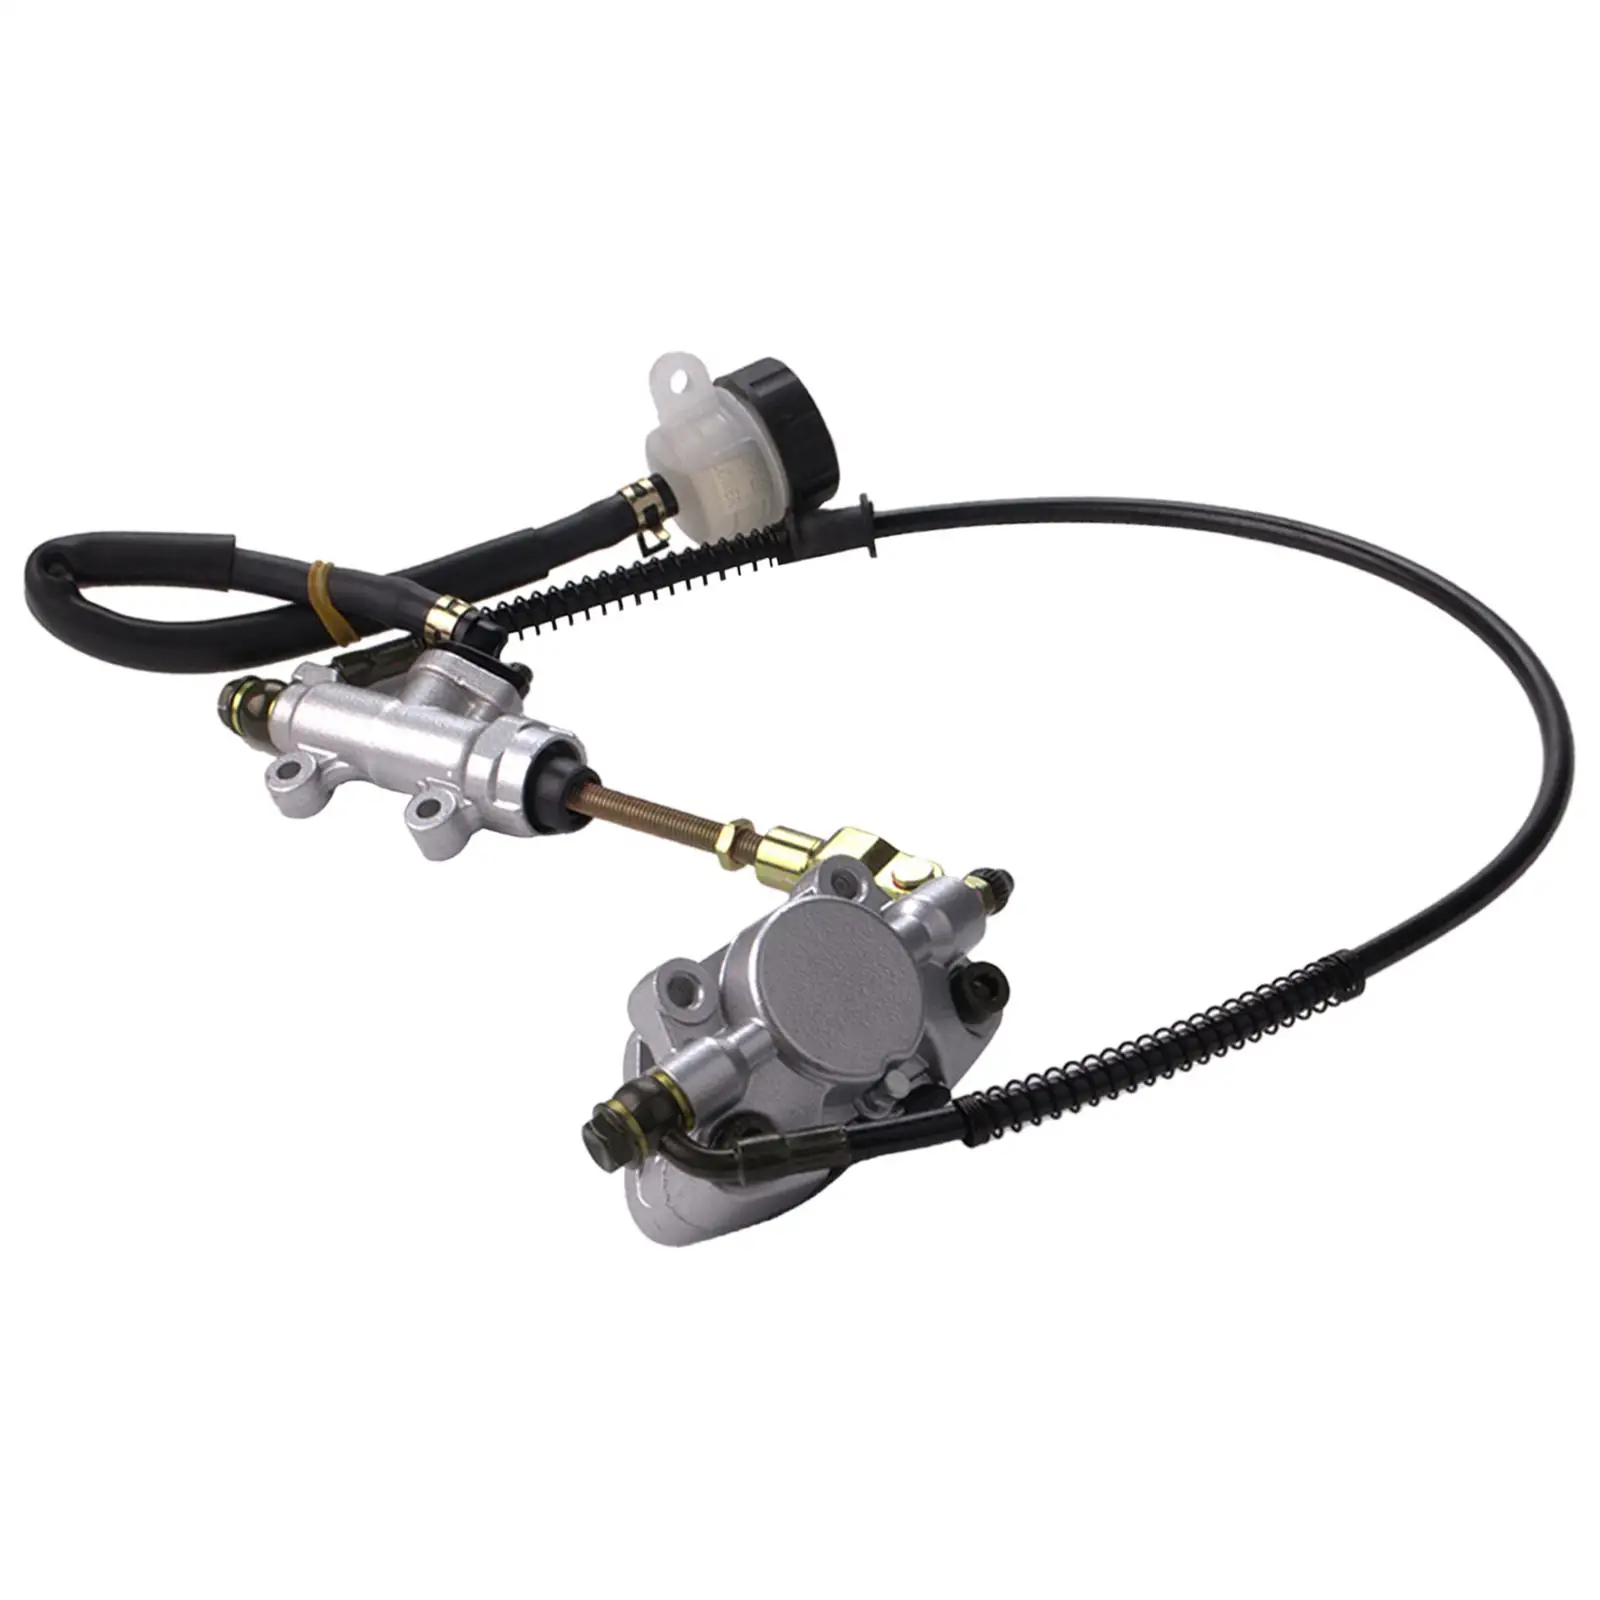 Rear Brake Master Cylinder Caliper Spare Parts Premium Aluminum Rear Disc Brake Master Cylinder Assembly for 110cc 125cc